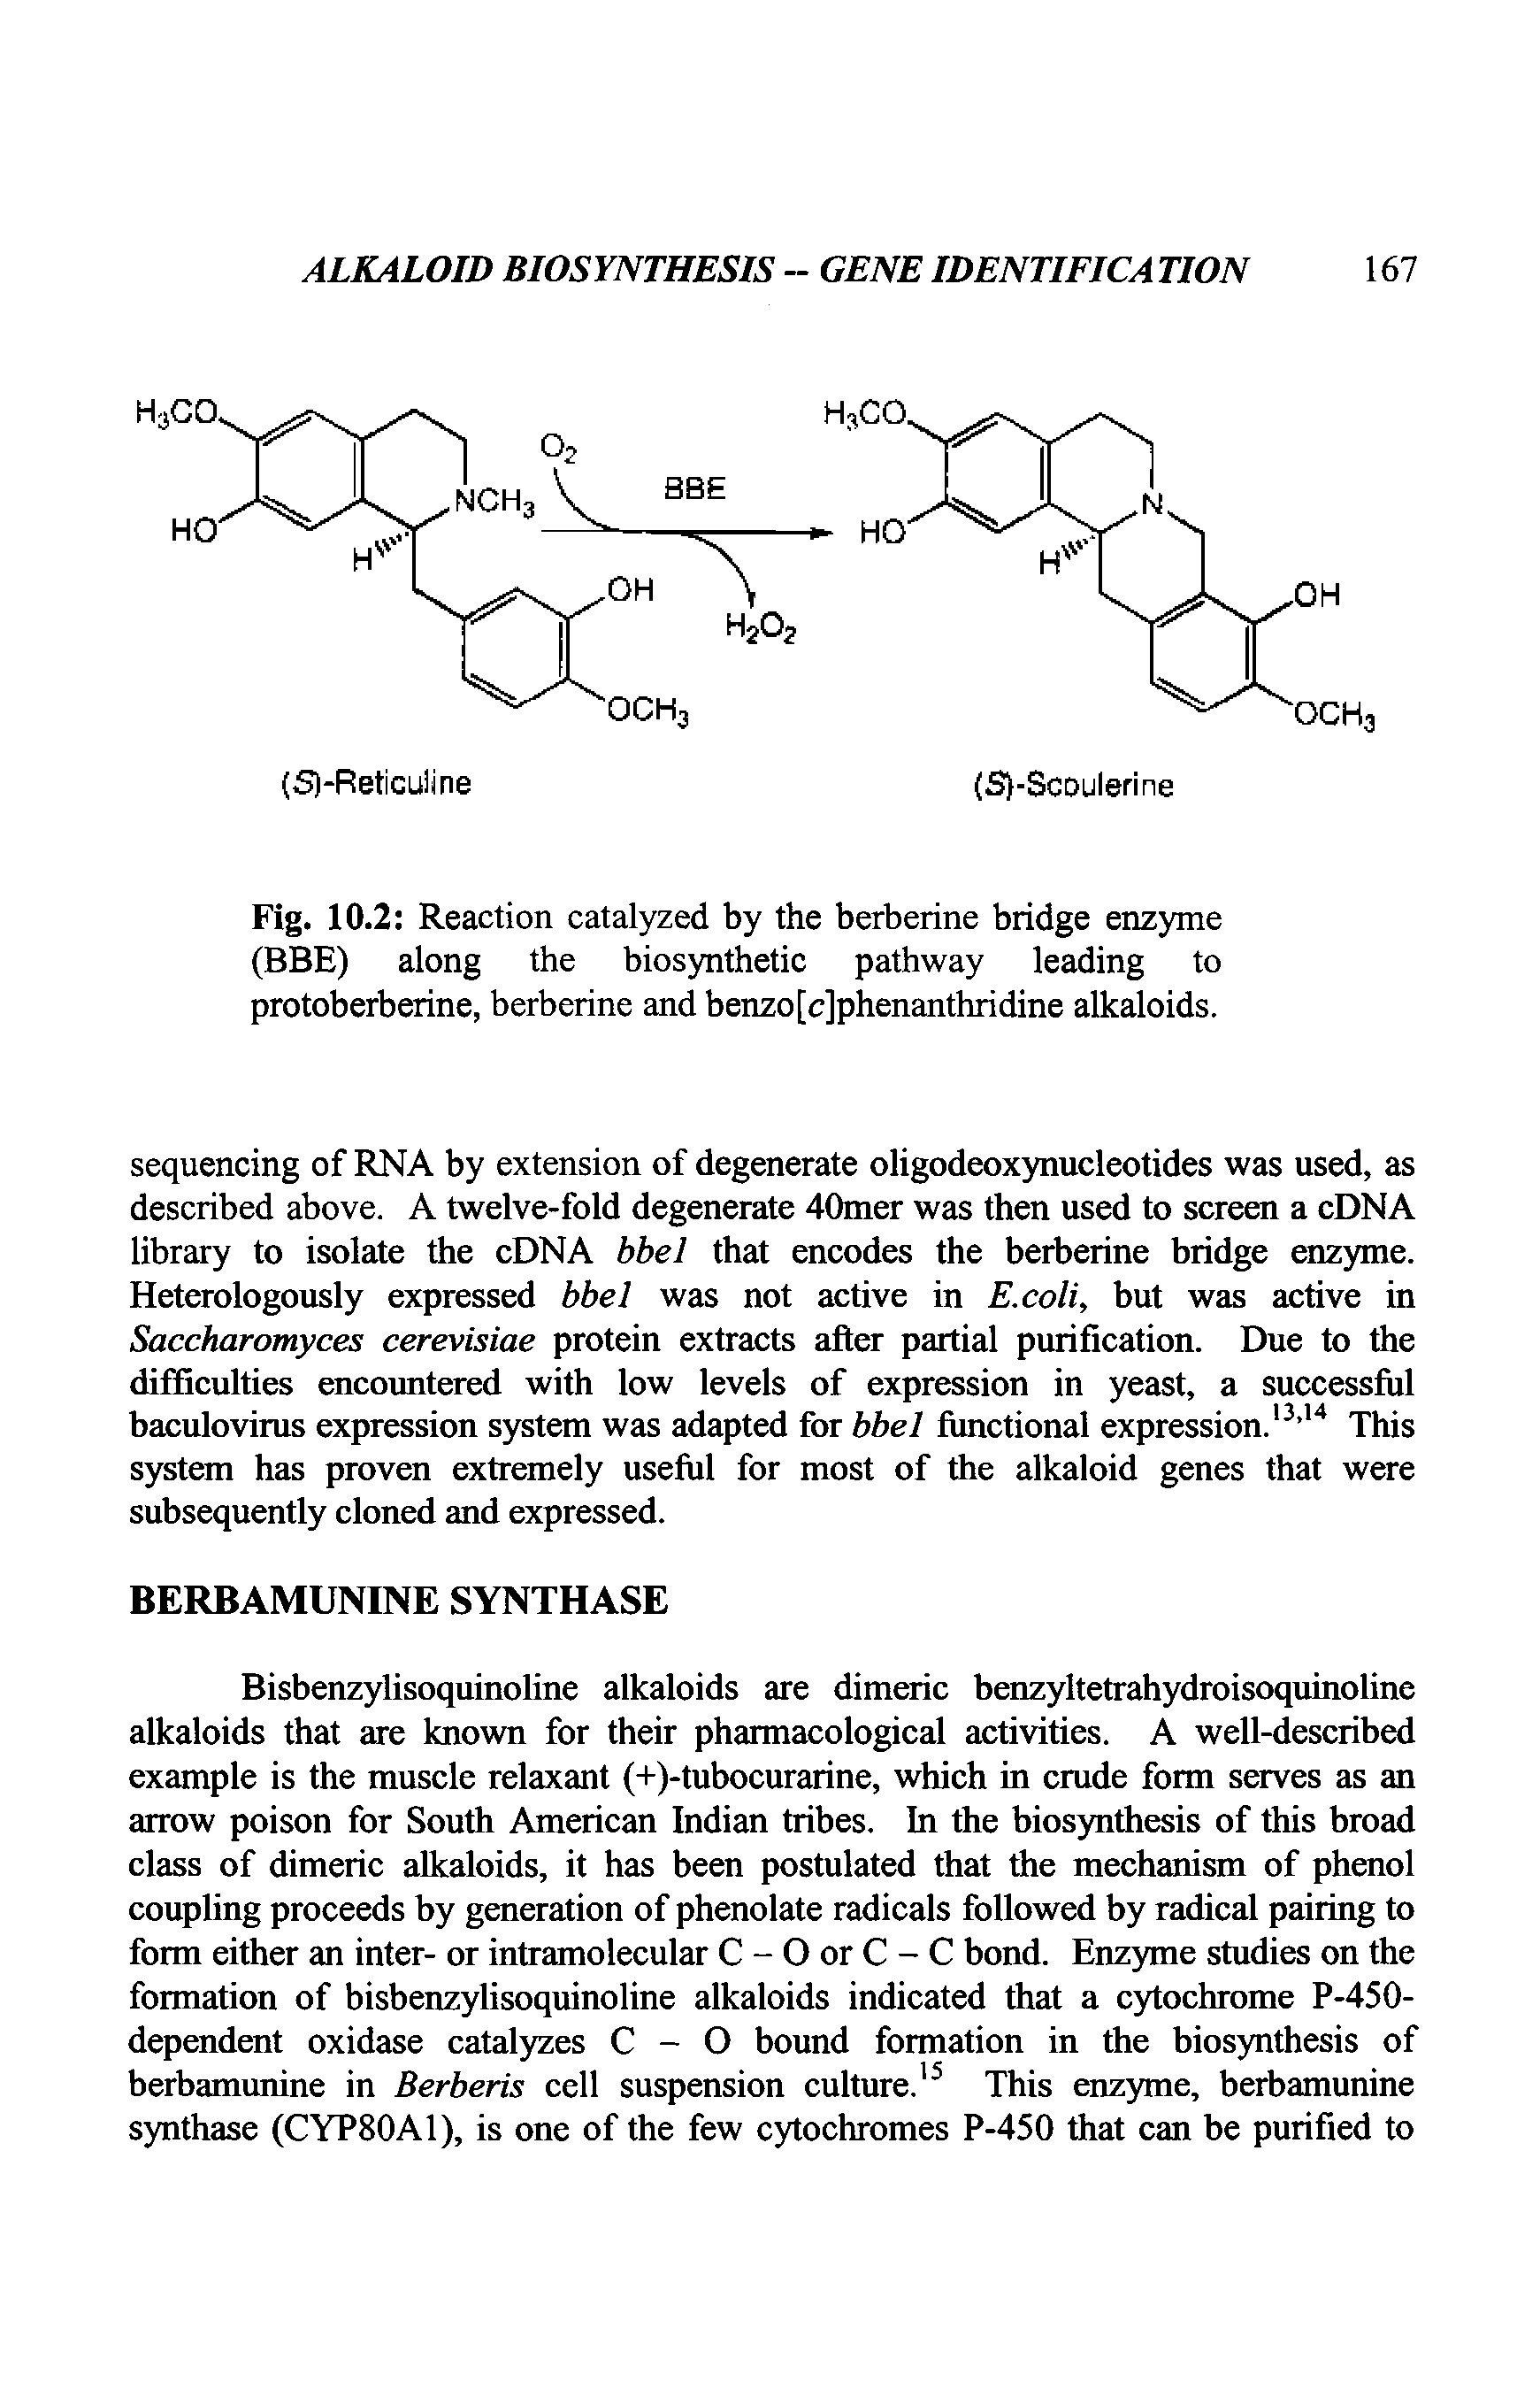 Fig. 10.2 Reaction catalyzed by the berberine bridge enzyme (BBE) along the biosynthetic pathway leading to protoberberine, berberine and benzo[c]phenanthridine alkaloids.